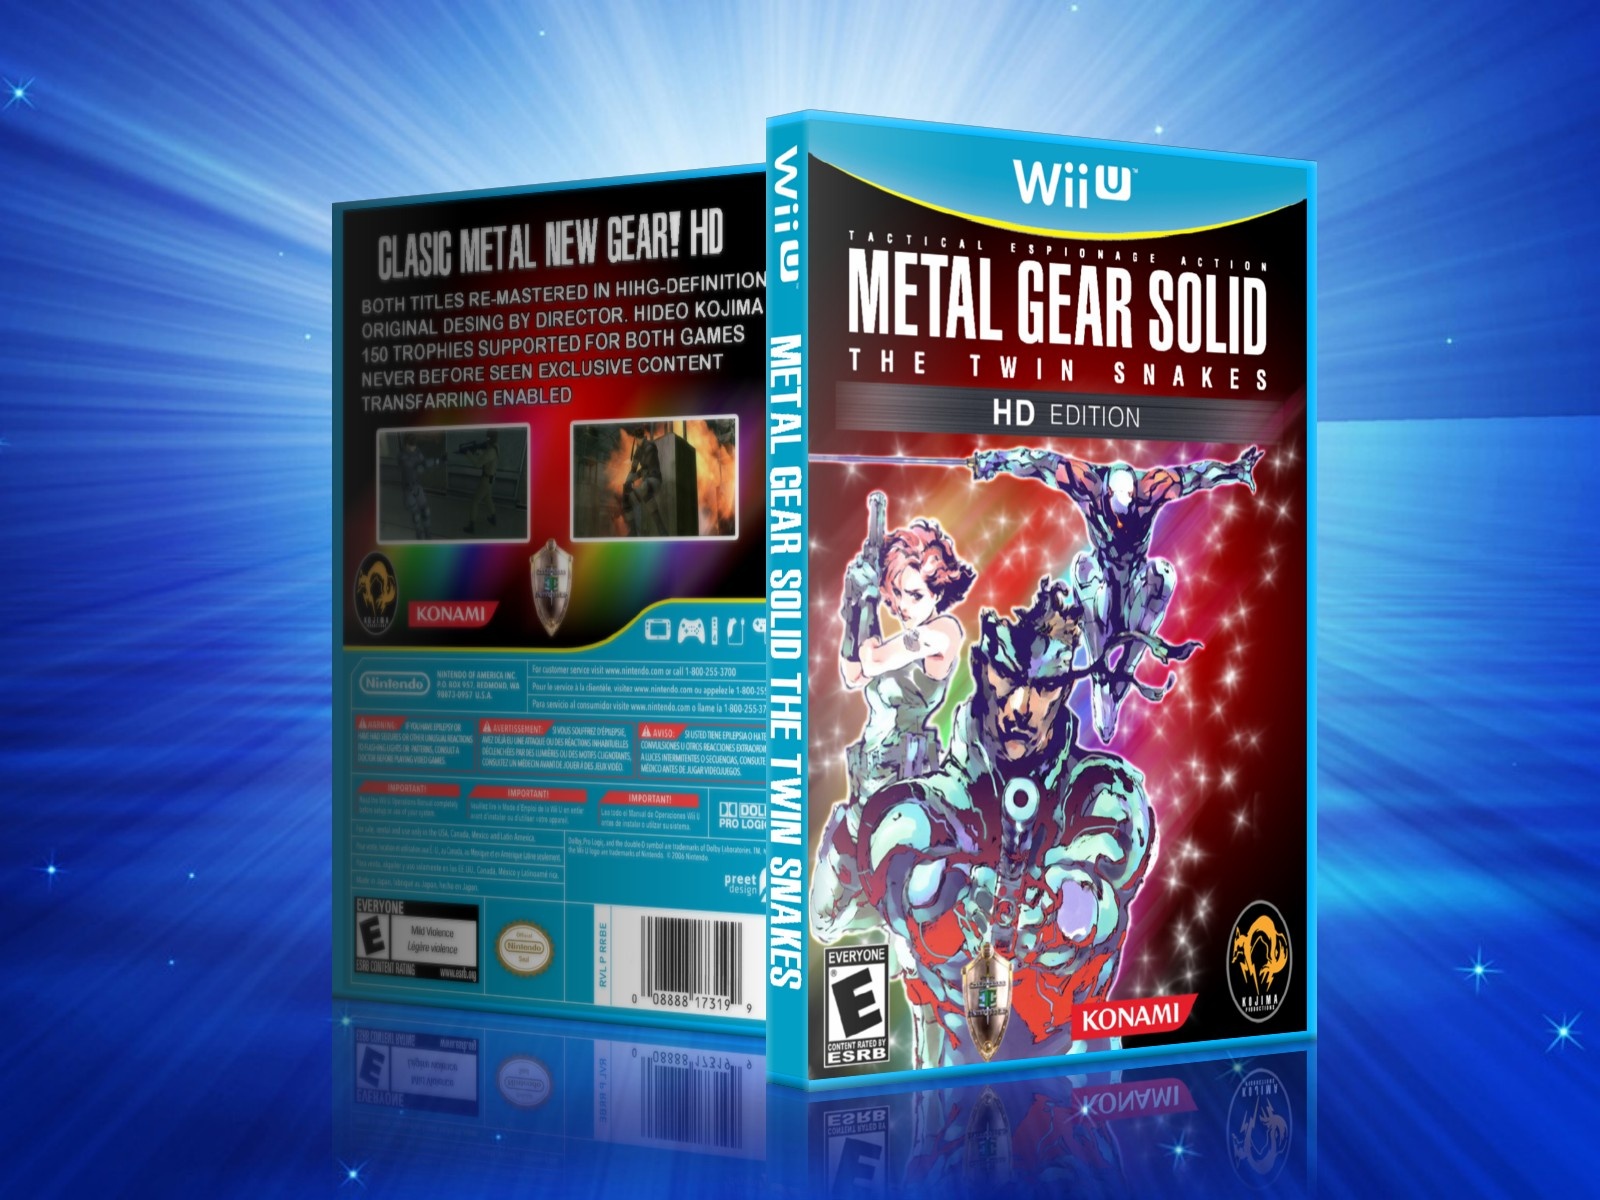 Metal Gear Solid The Twin Snakes HD Edition box cover